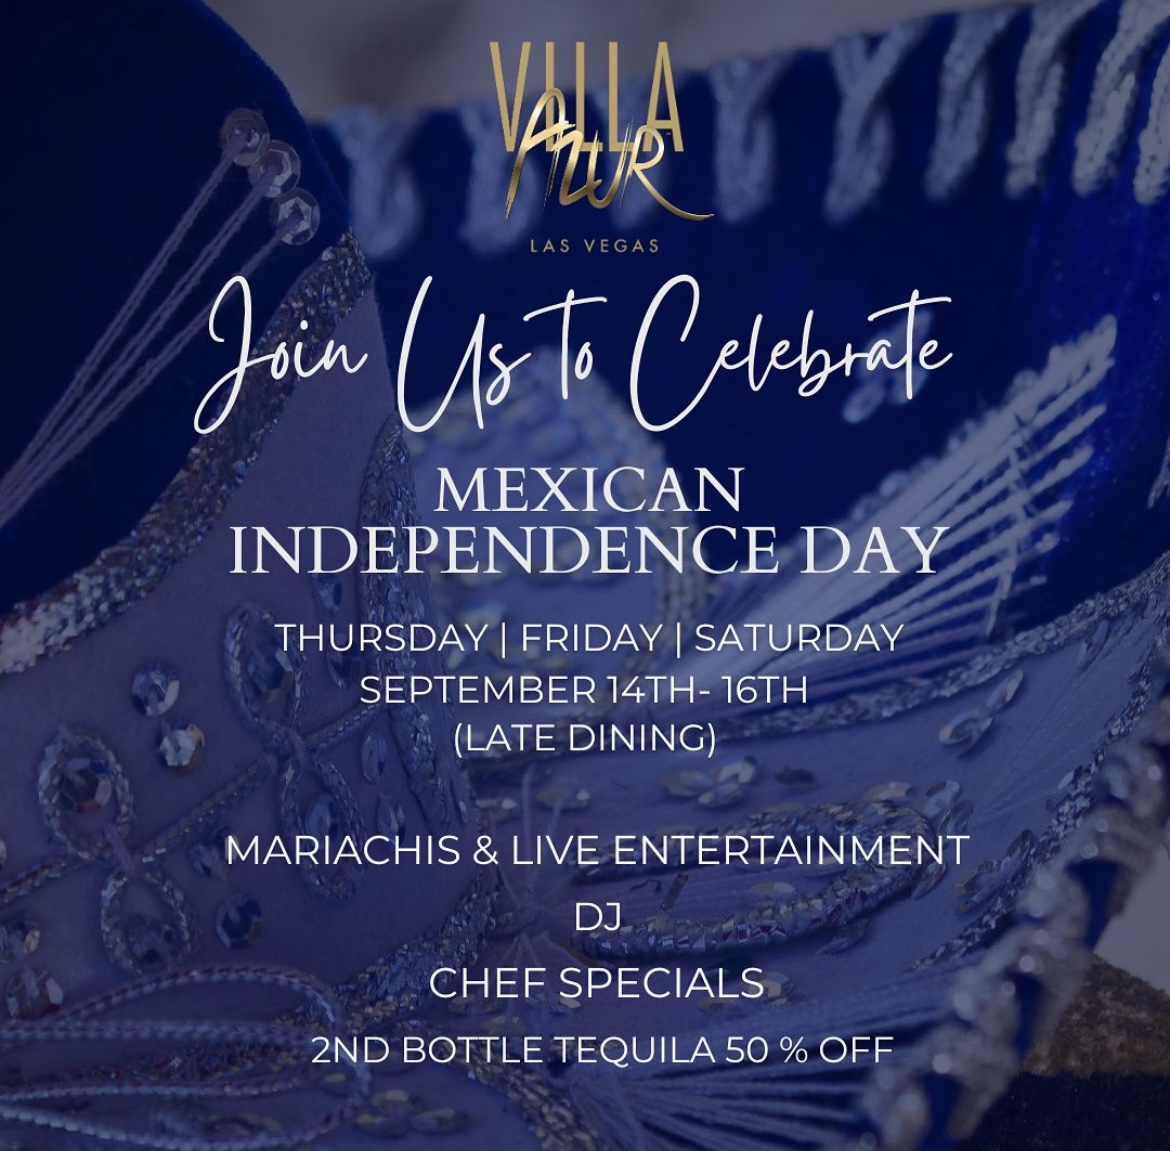 Join the Fiesta: Villa Azur Las Vegas Commemorates Mexican Independence Day in Style